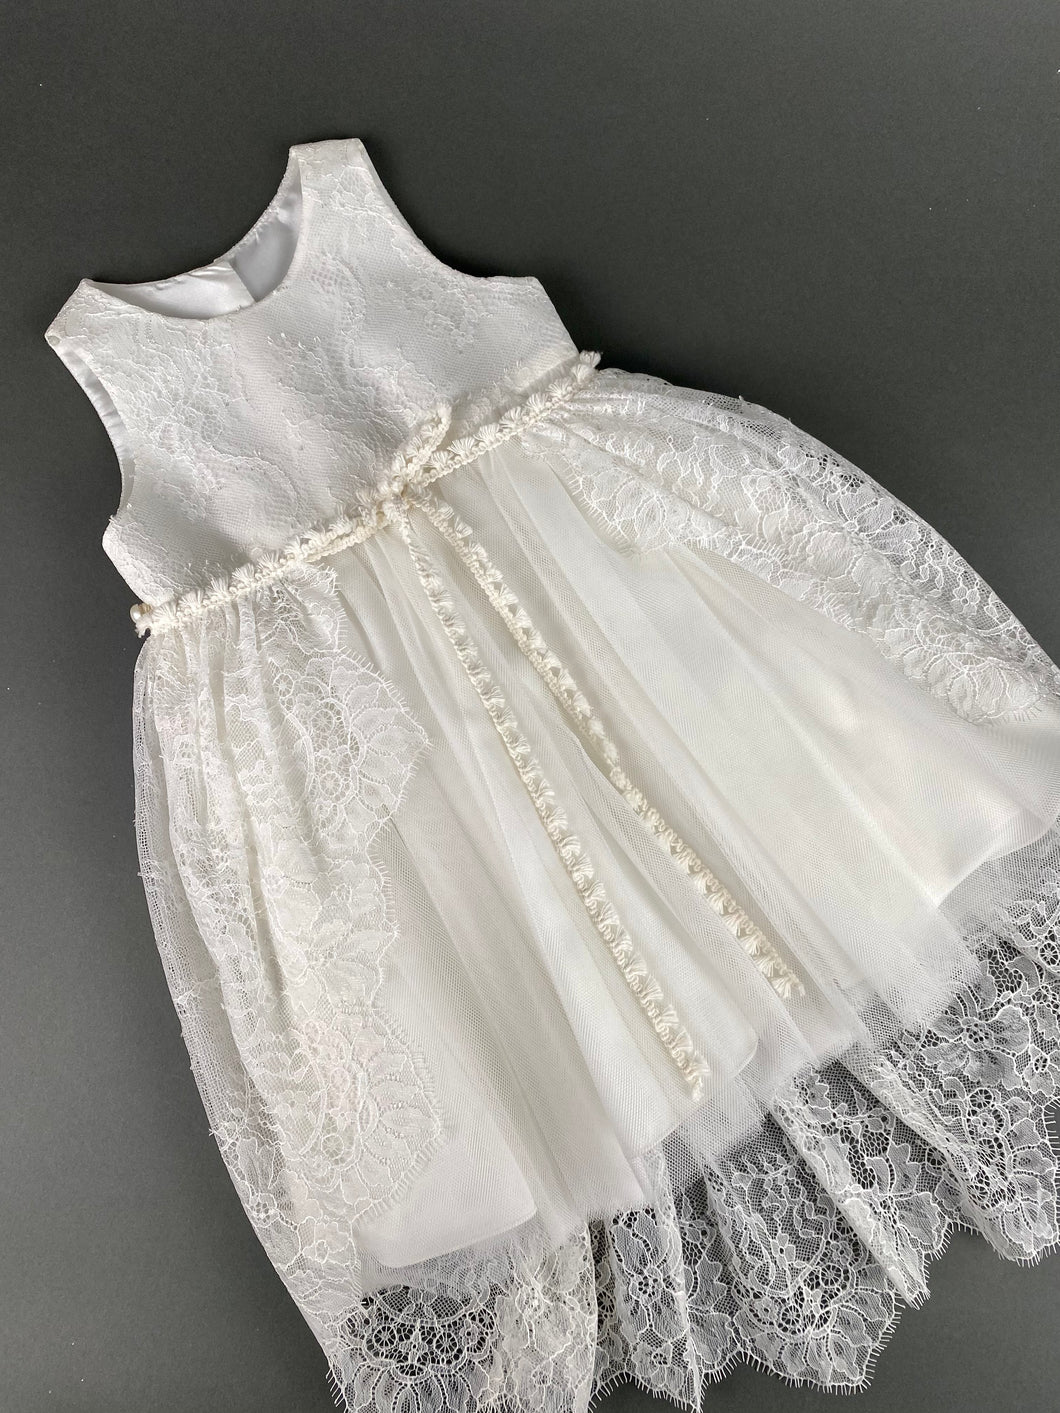 Dress 72 Girls Baptismal Christening  French Lace Dress with Tail, removable Skirt Overlay, matching Bolero and Hat. Made in Greece exclusively for Rosies Collections